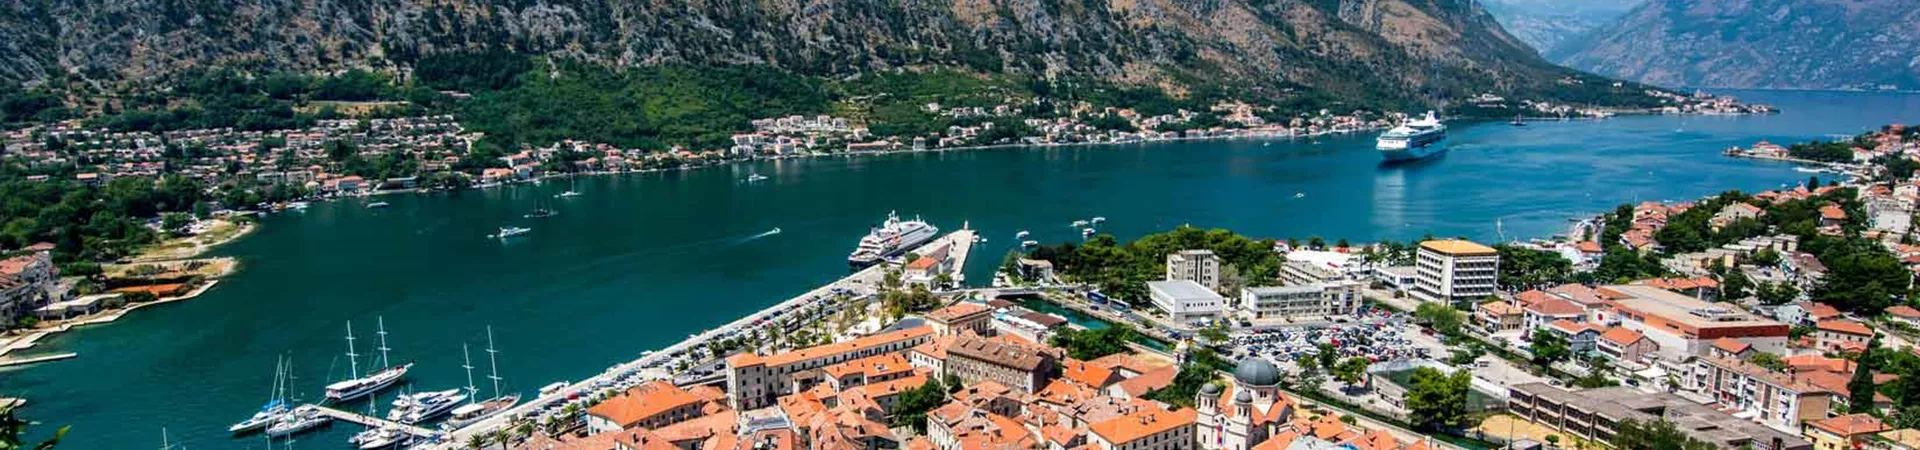 Montenegro Trips and Travel Guide